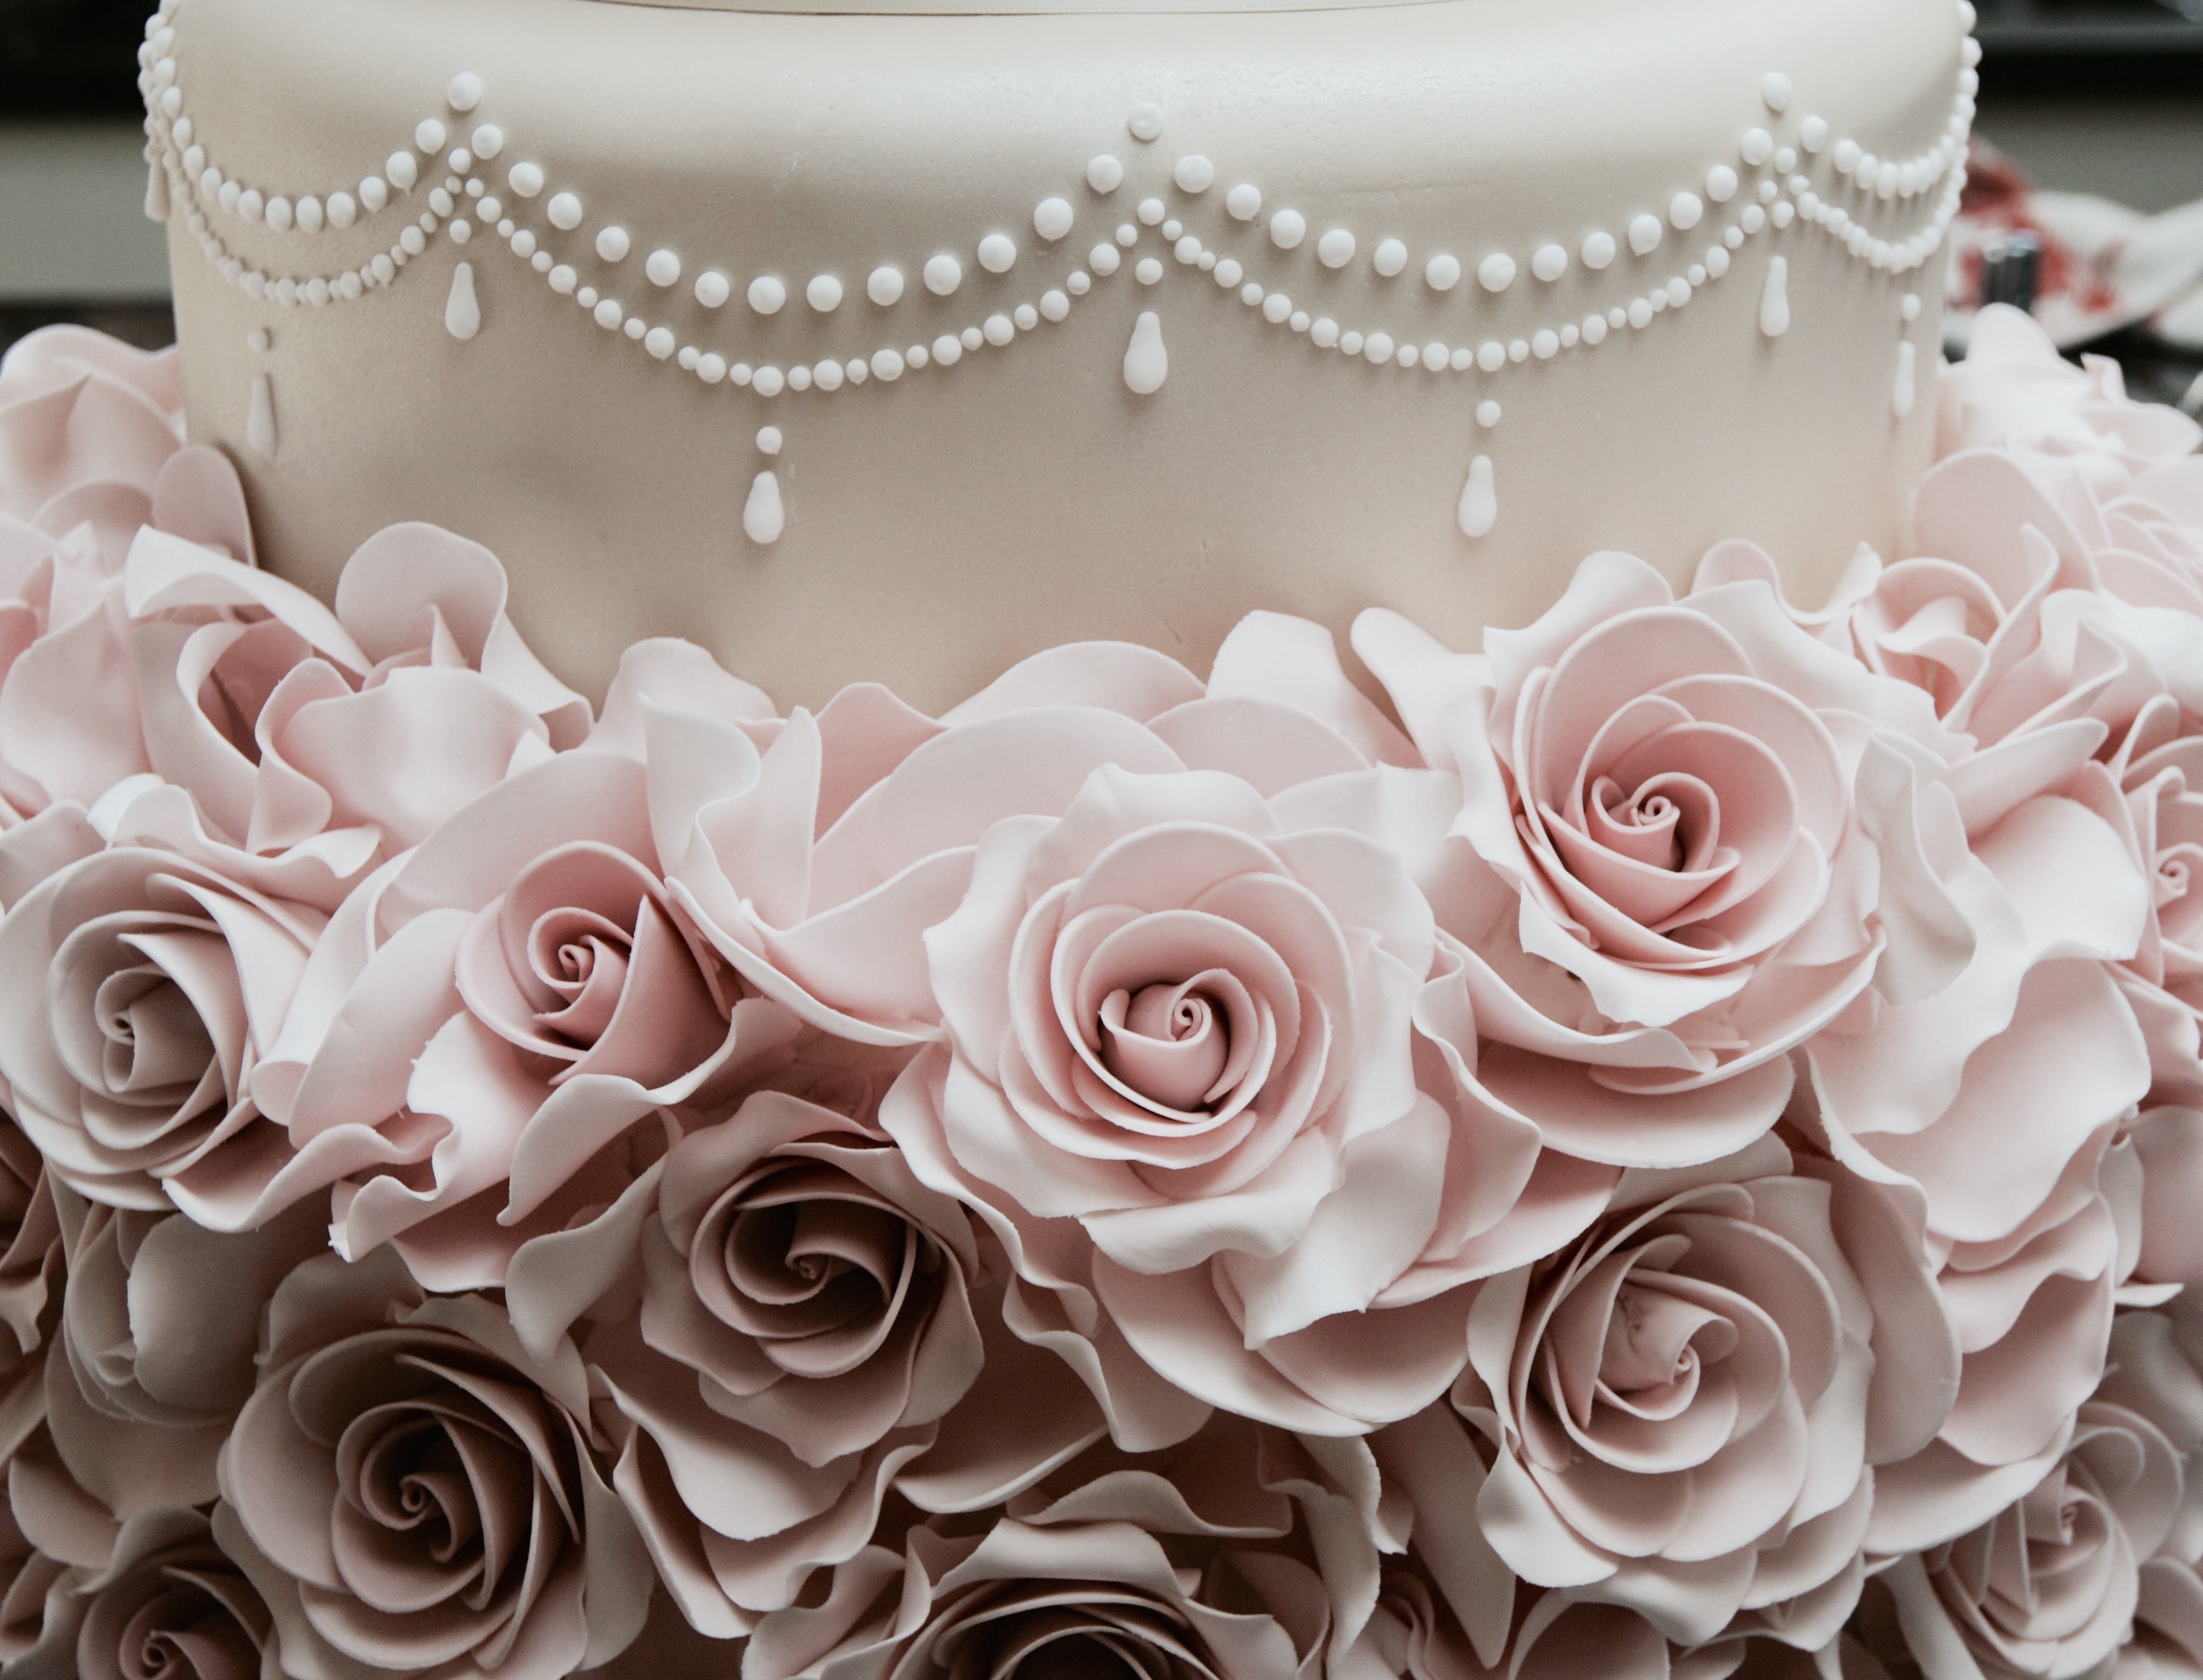 Wedding Cake Trends for 2016